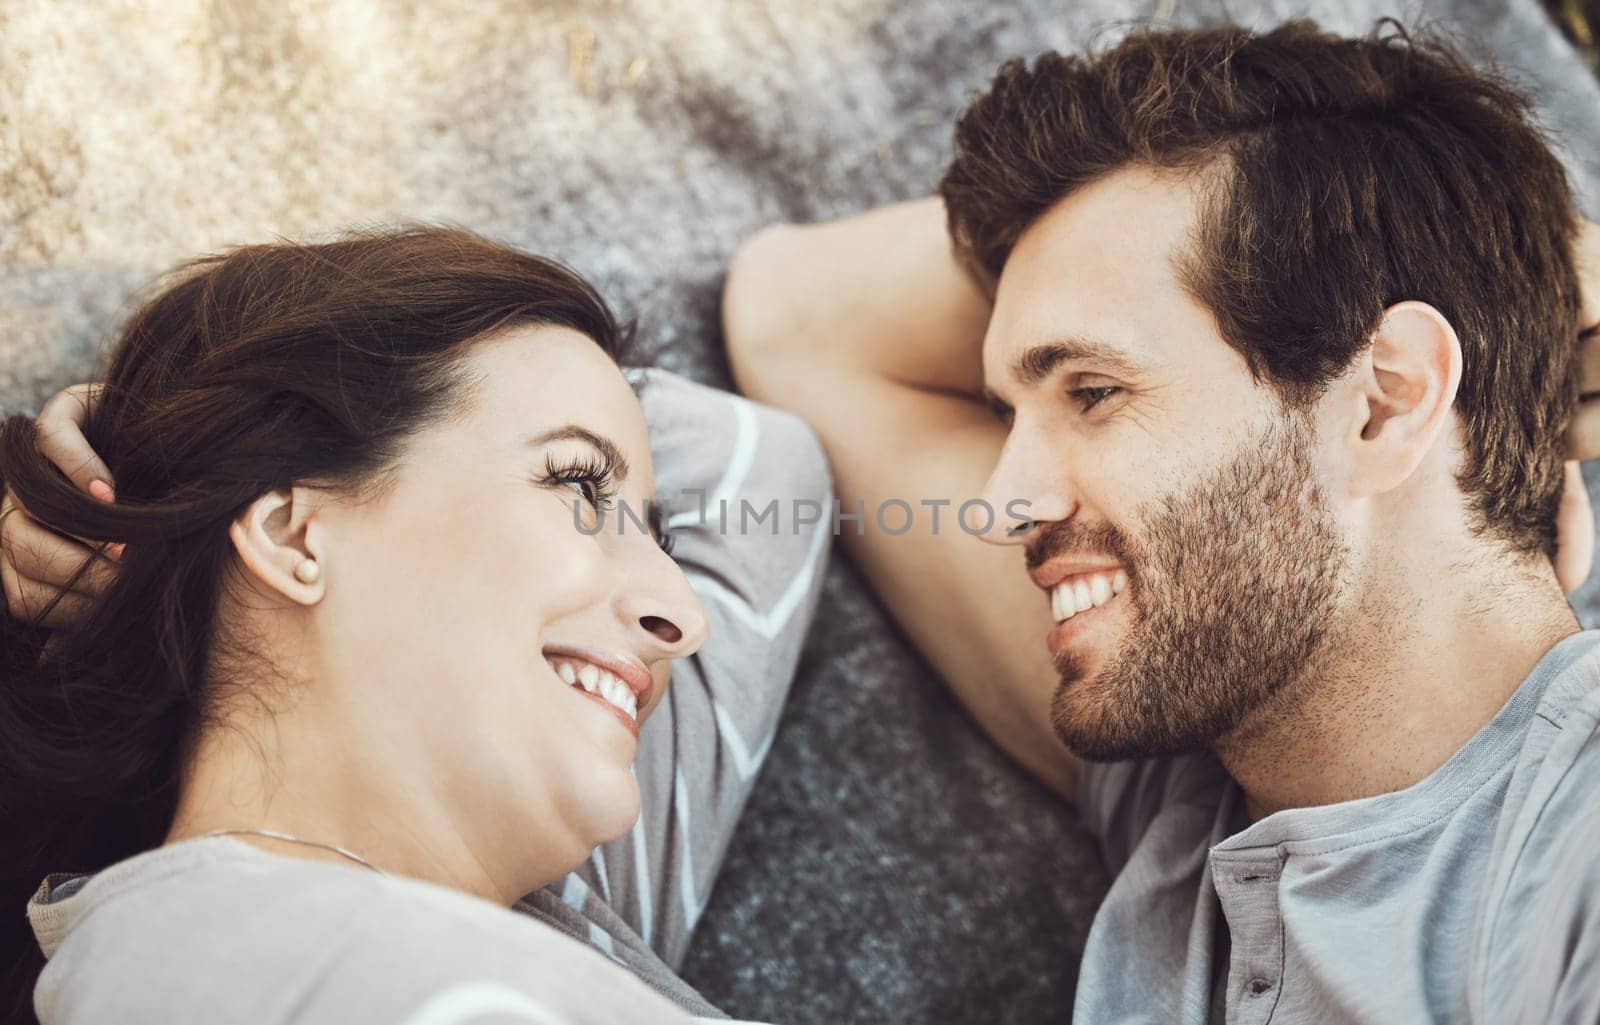 Love, couple romance and relax, talking and having fun time together outdoors on valentines day. Trust, support and face of happy man and woman lying on romantic date, smile and having conversation